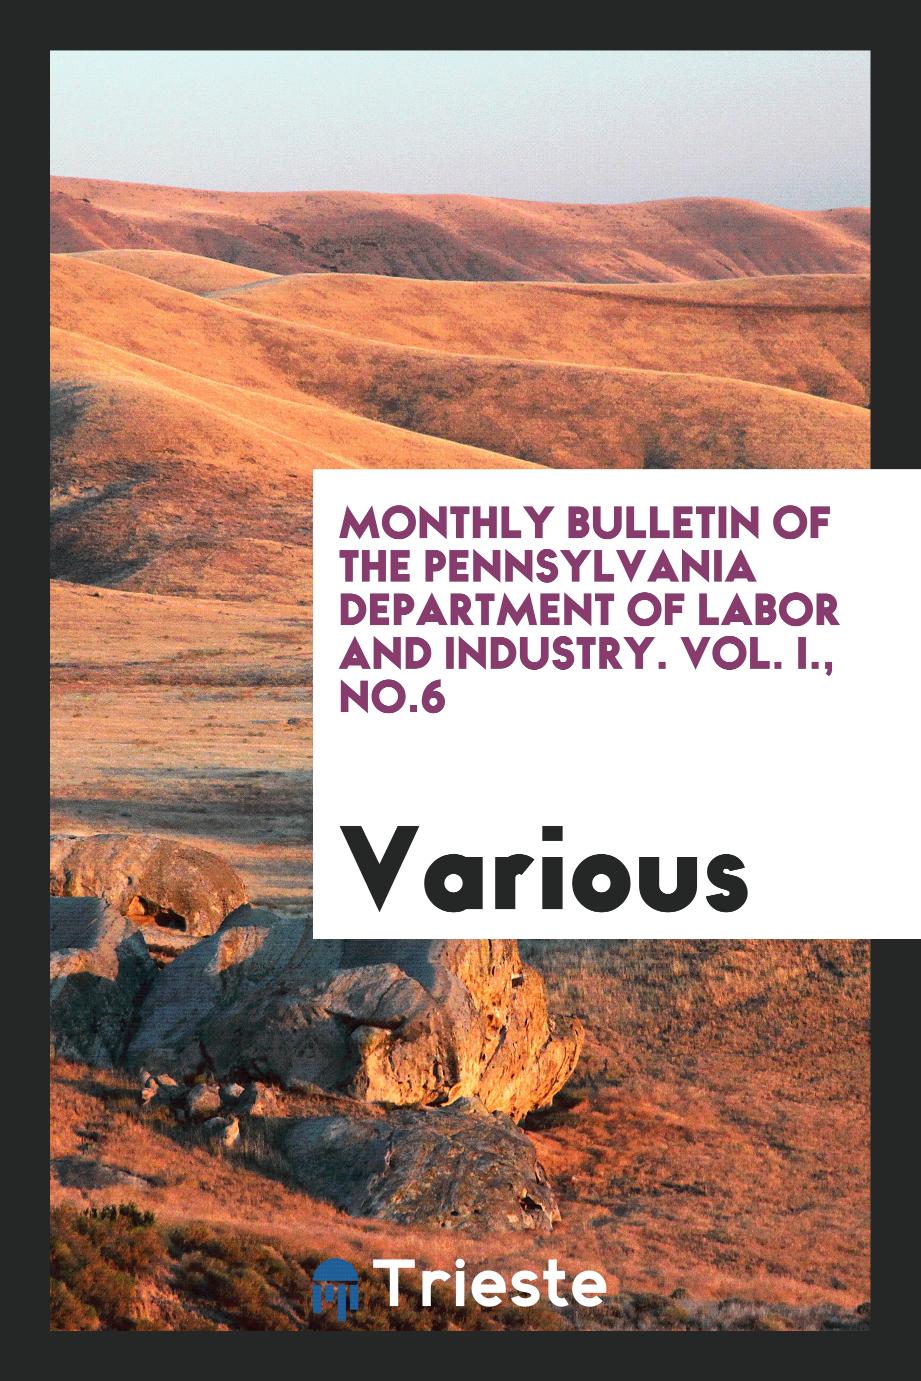 Monthly Bulletin of the Pennsylvania Department of Labor and Industry. Vol. I., No.6